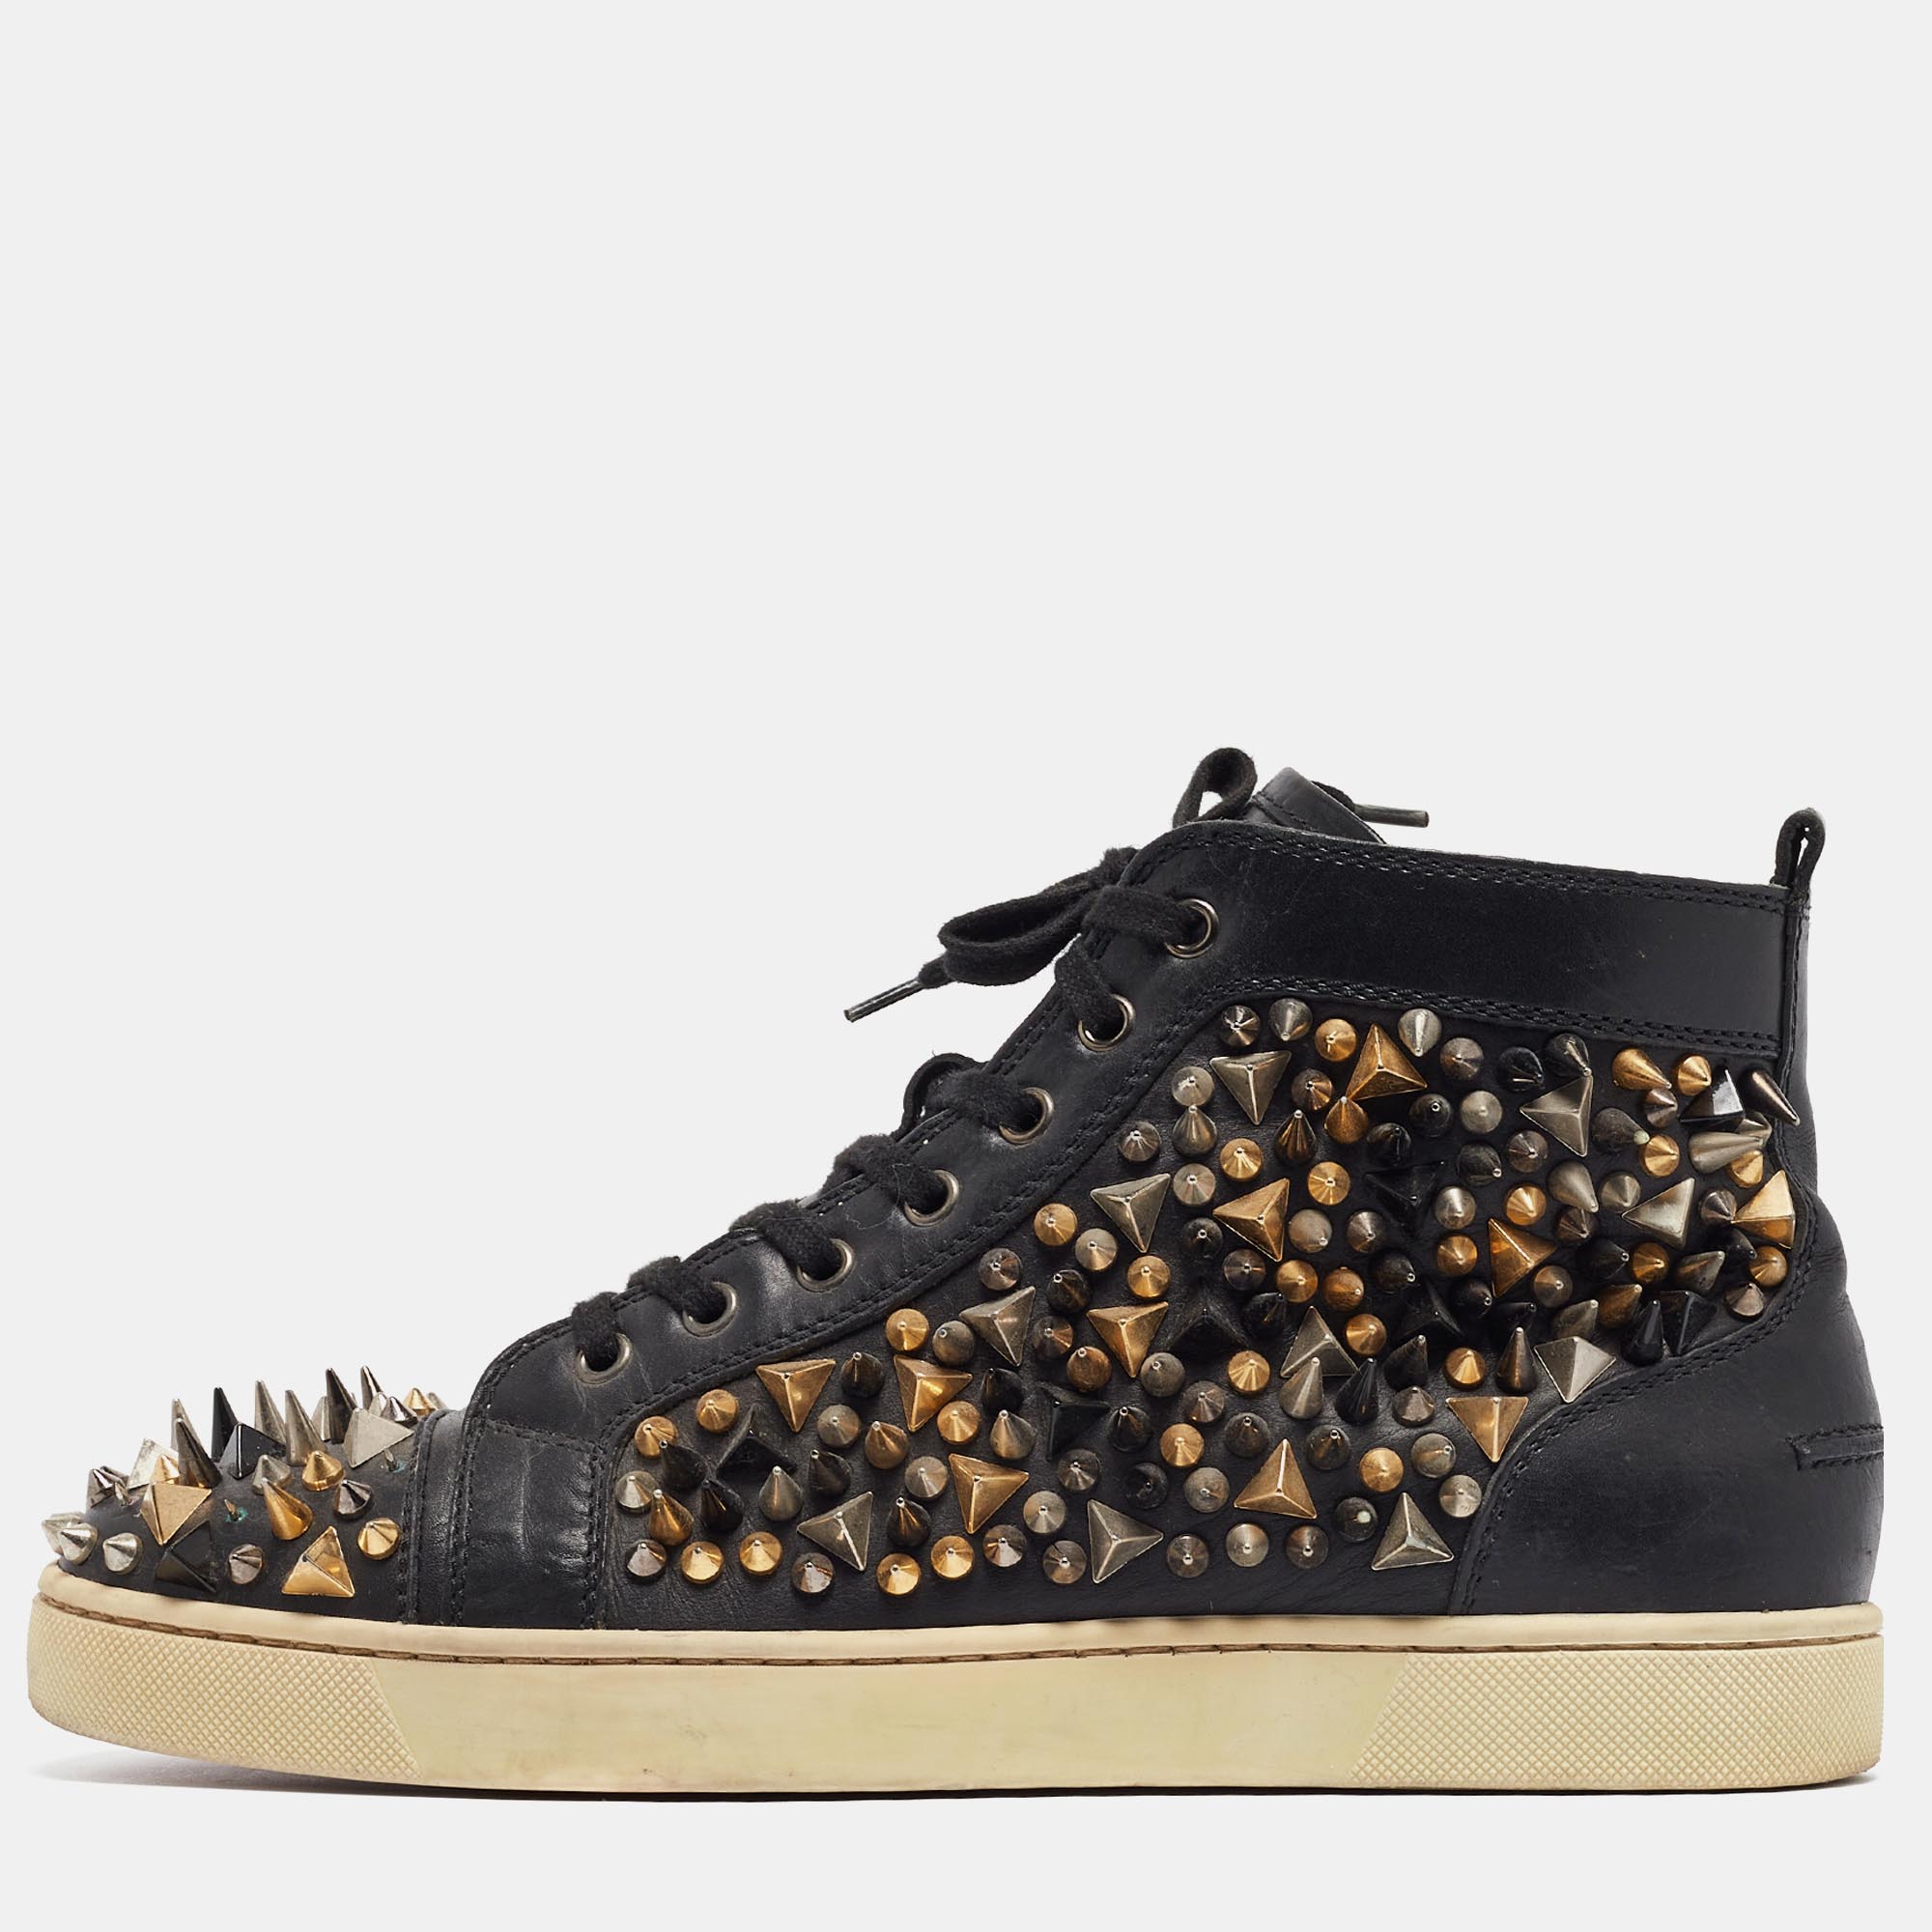 Pre-owned Christian Louboutin Black Leather Spikes High Top Sneakers Size 42